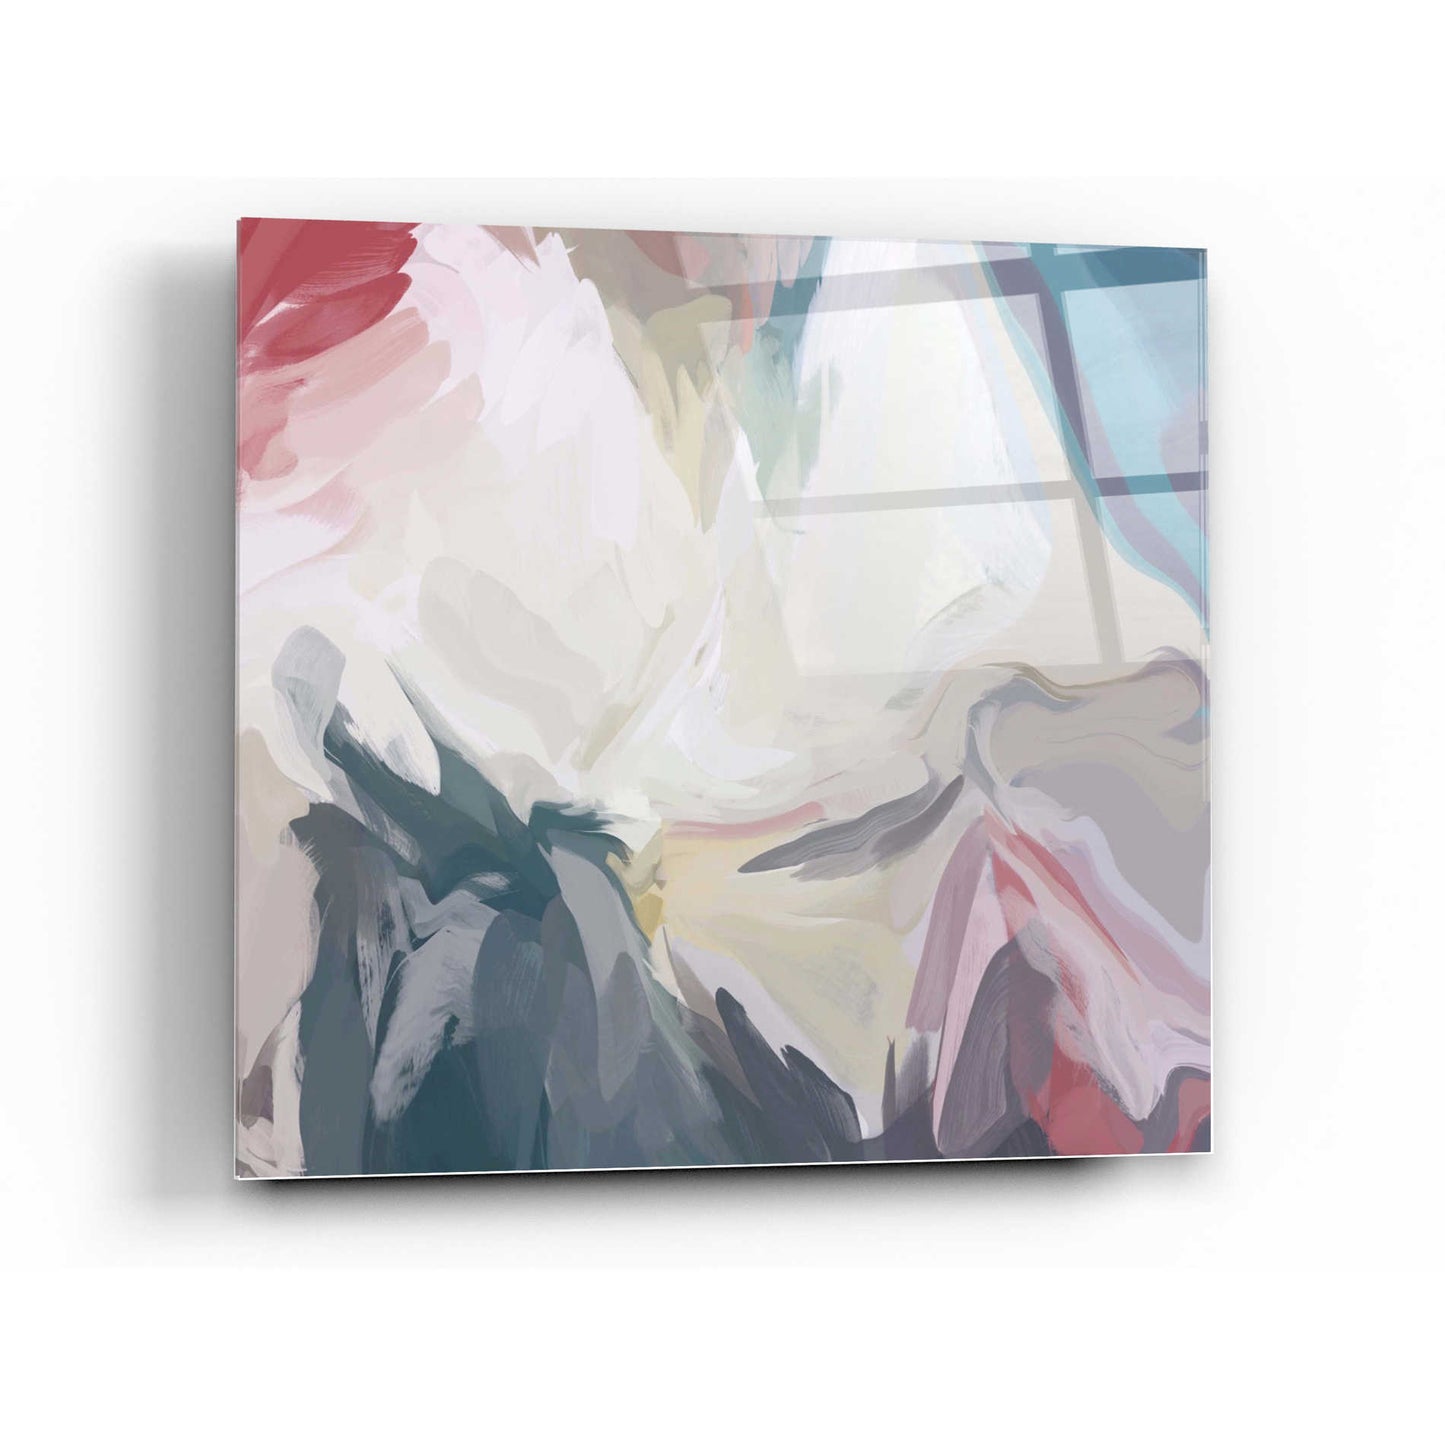 Epic Art 'From Day to Day 5' by Irena Orlov, Acrylic Glass Wall Art